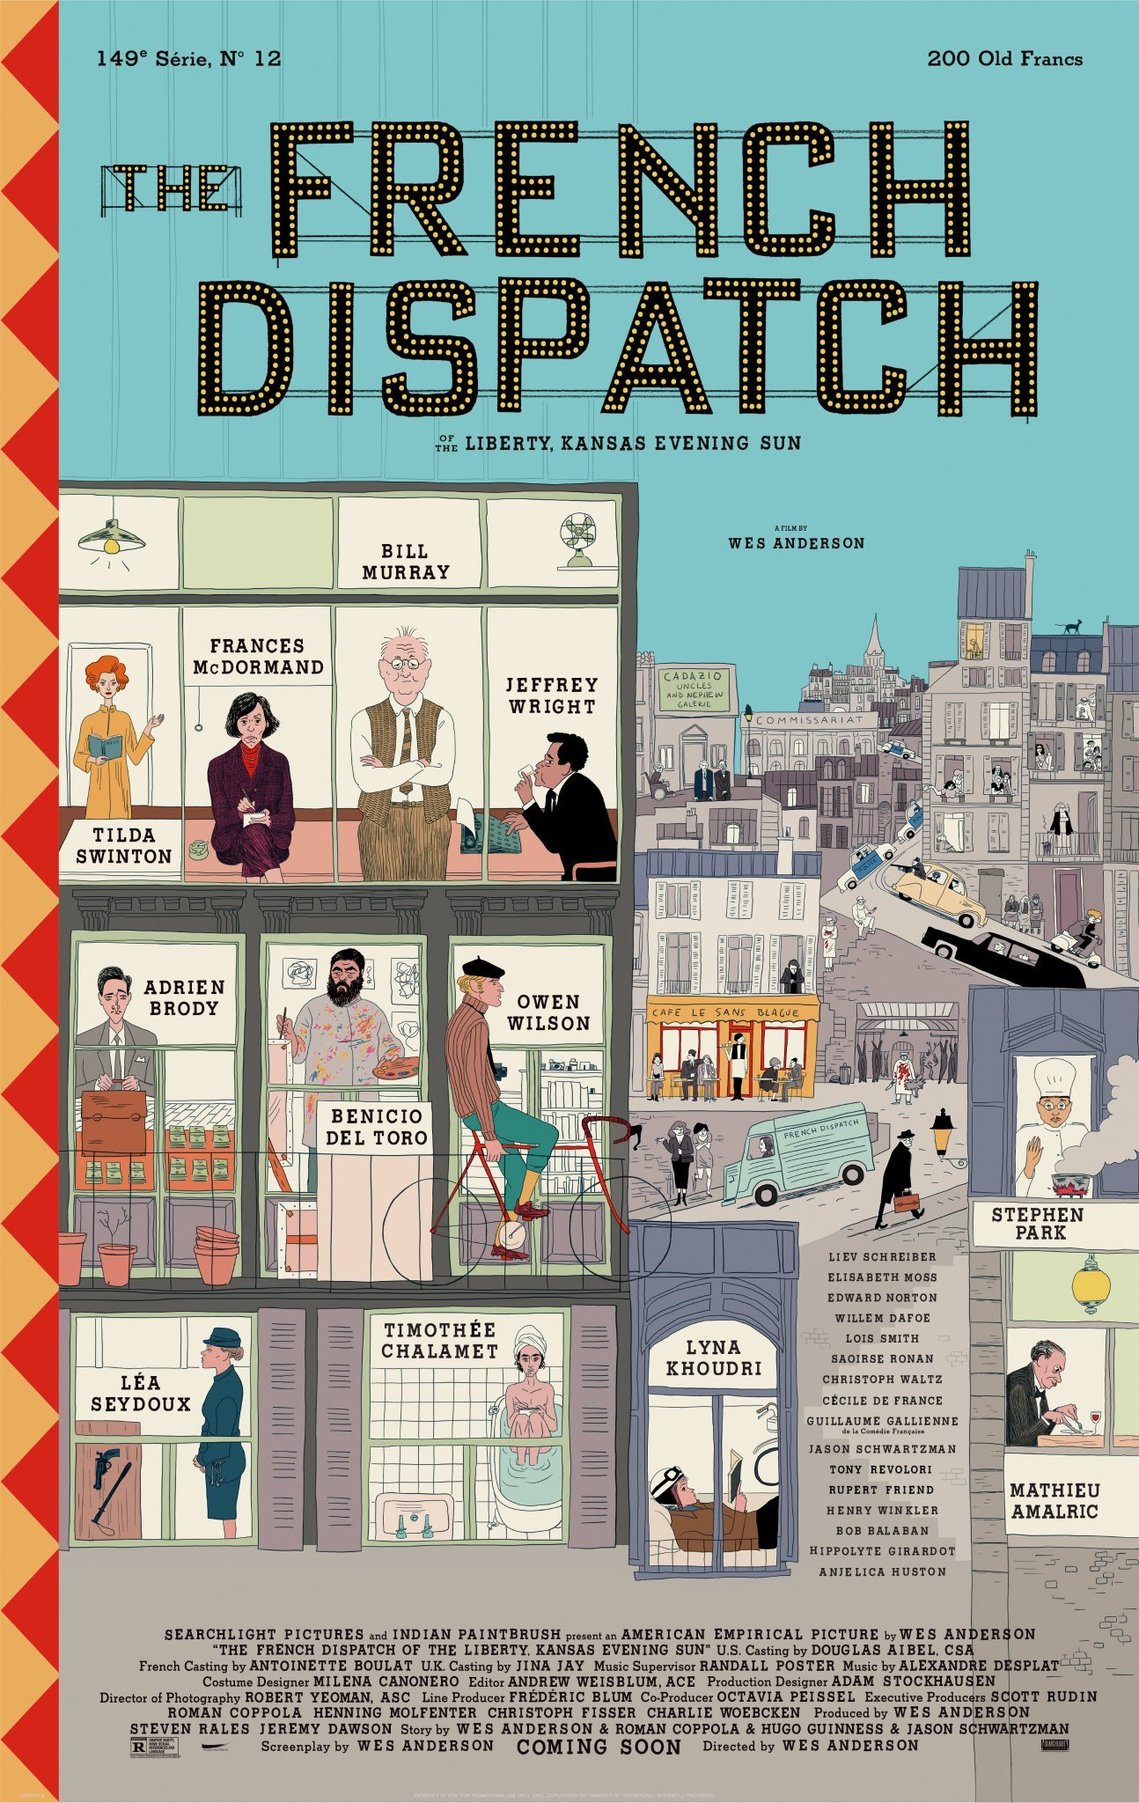 Official poster for The French Dispatch by Wes Anderson    Comissioned work for the film The French Dispatch -  Wes Anderson  by Javi Aznarez 